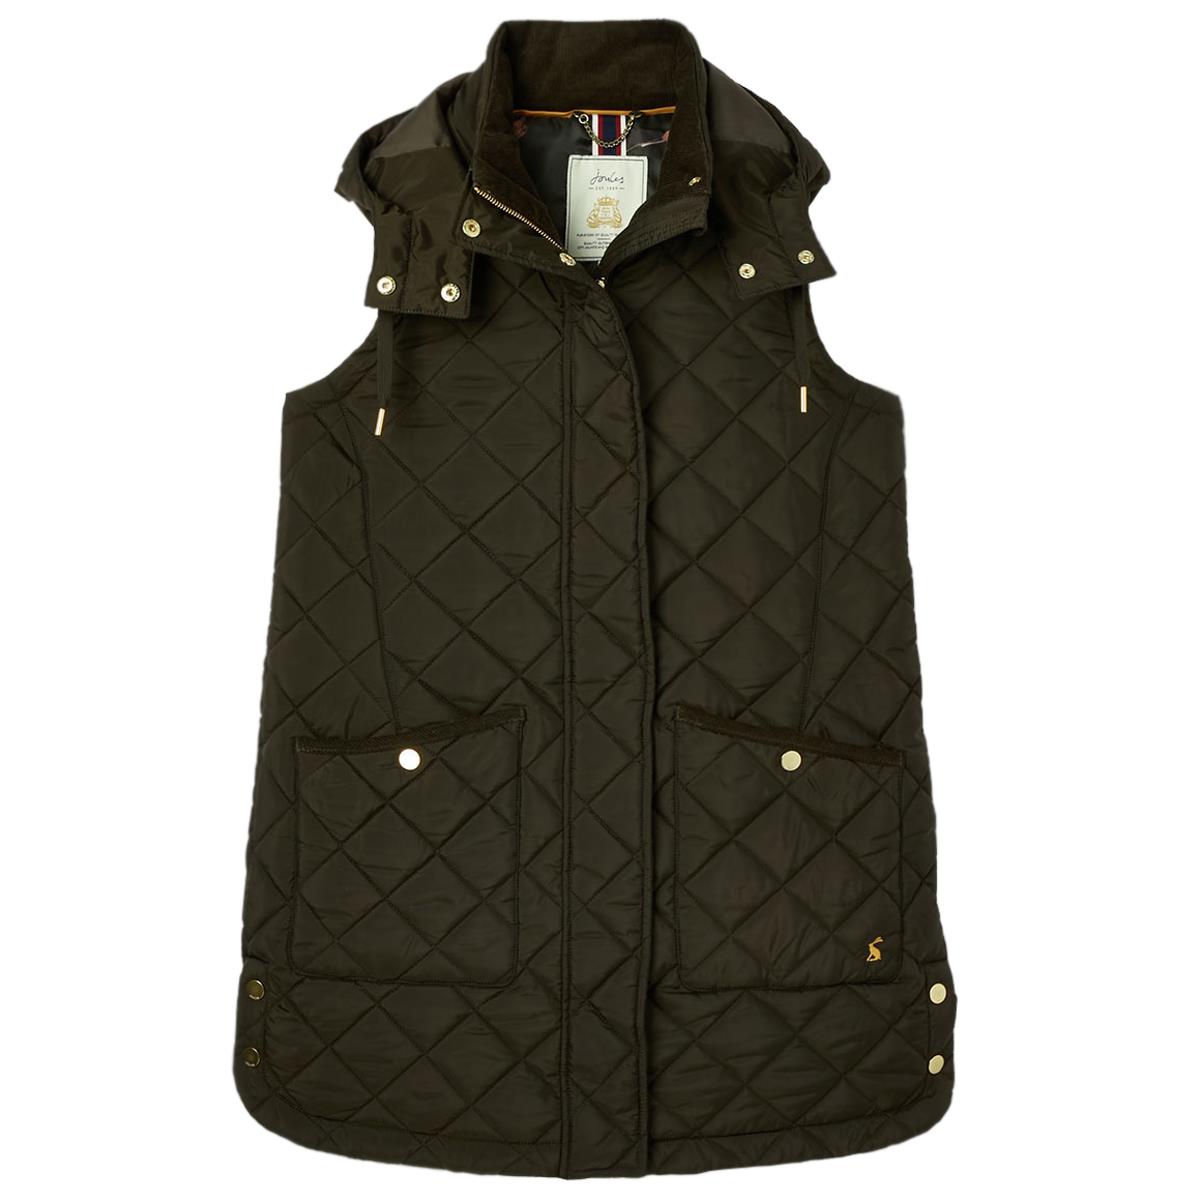 What is the Joules Chatham Gilet for women?